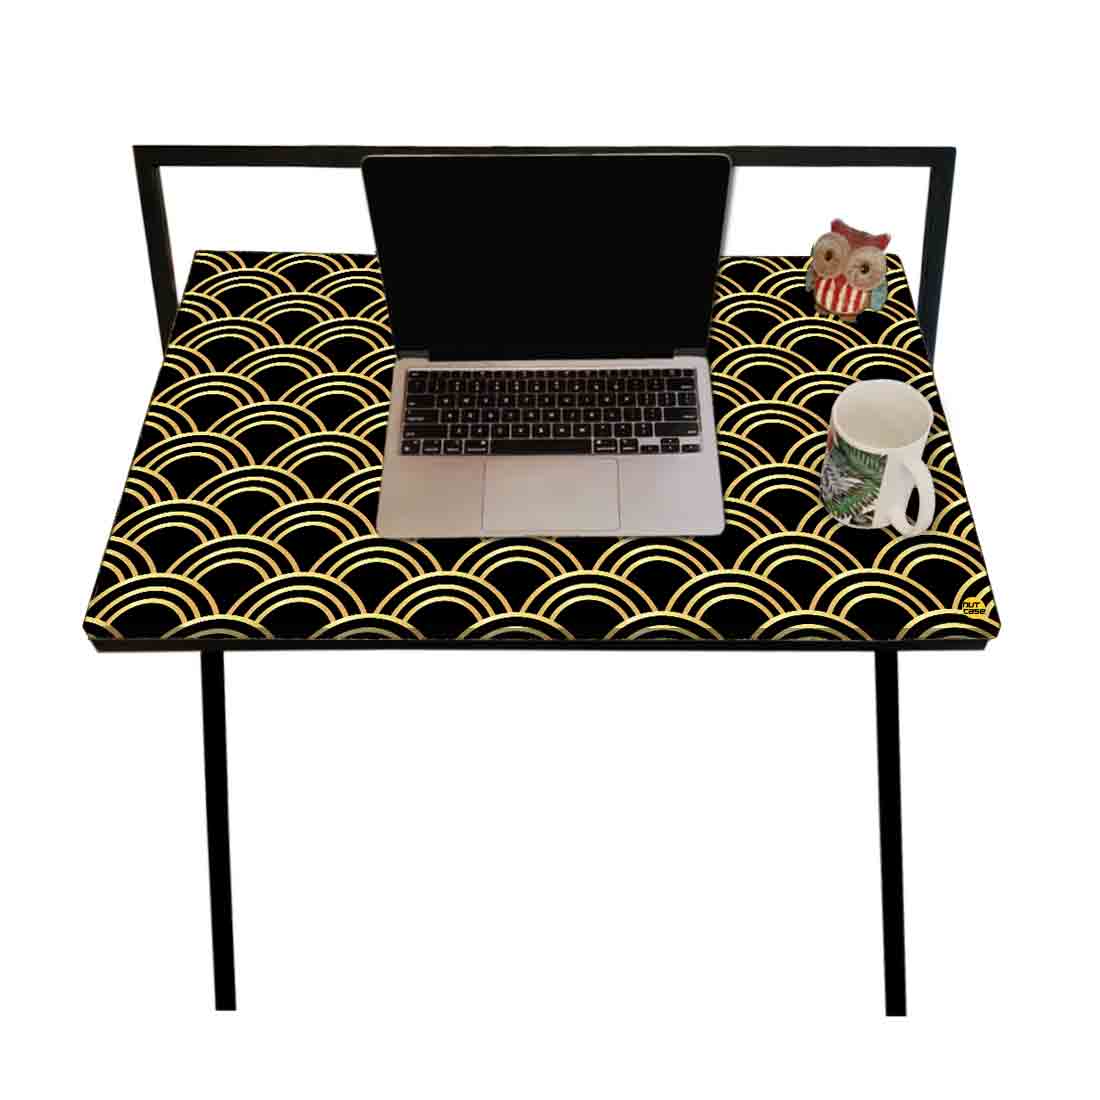 Foldable Small Computer Table for Bedroom Study Desk Nutcase